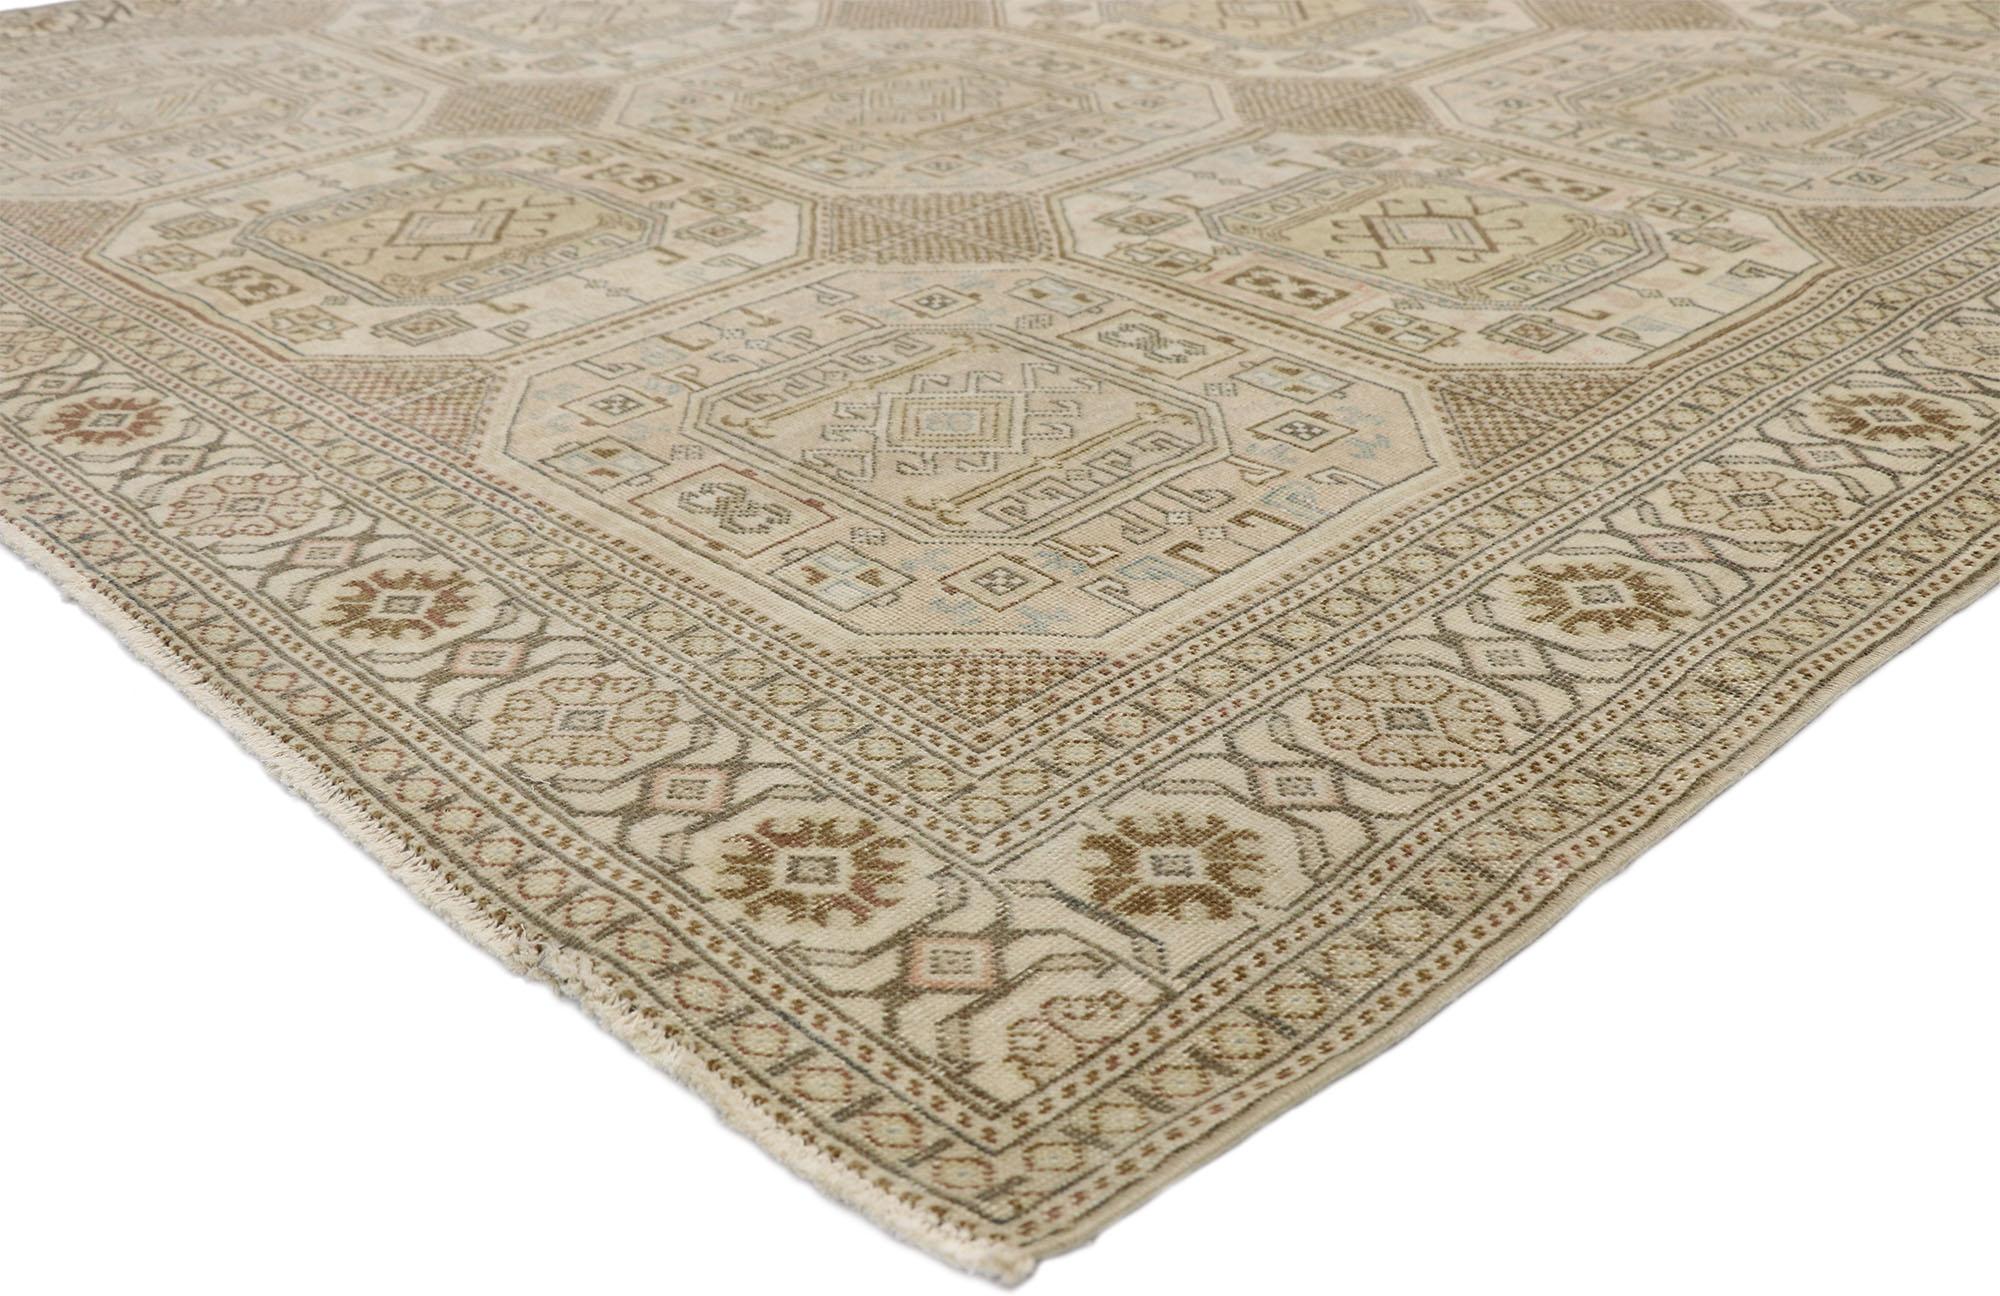 52658 Distressed Vintage Turkish Sivas Rug with Tekke Turkmen Design. Displaying nomadic charm and modern style, this hand knotted wool distressed vintage Turkish Sivas rug is an amalgam of Tekke Turkmen influence. It features a geometric pattern